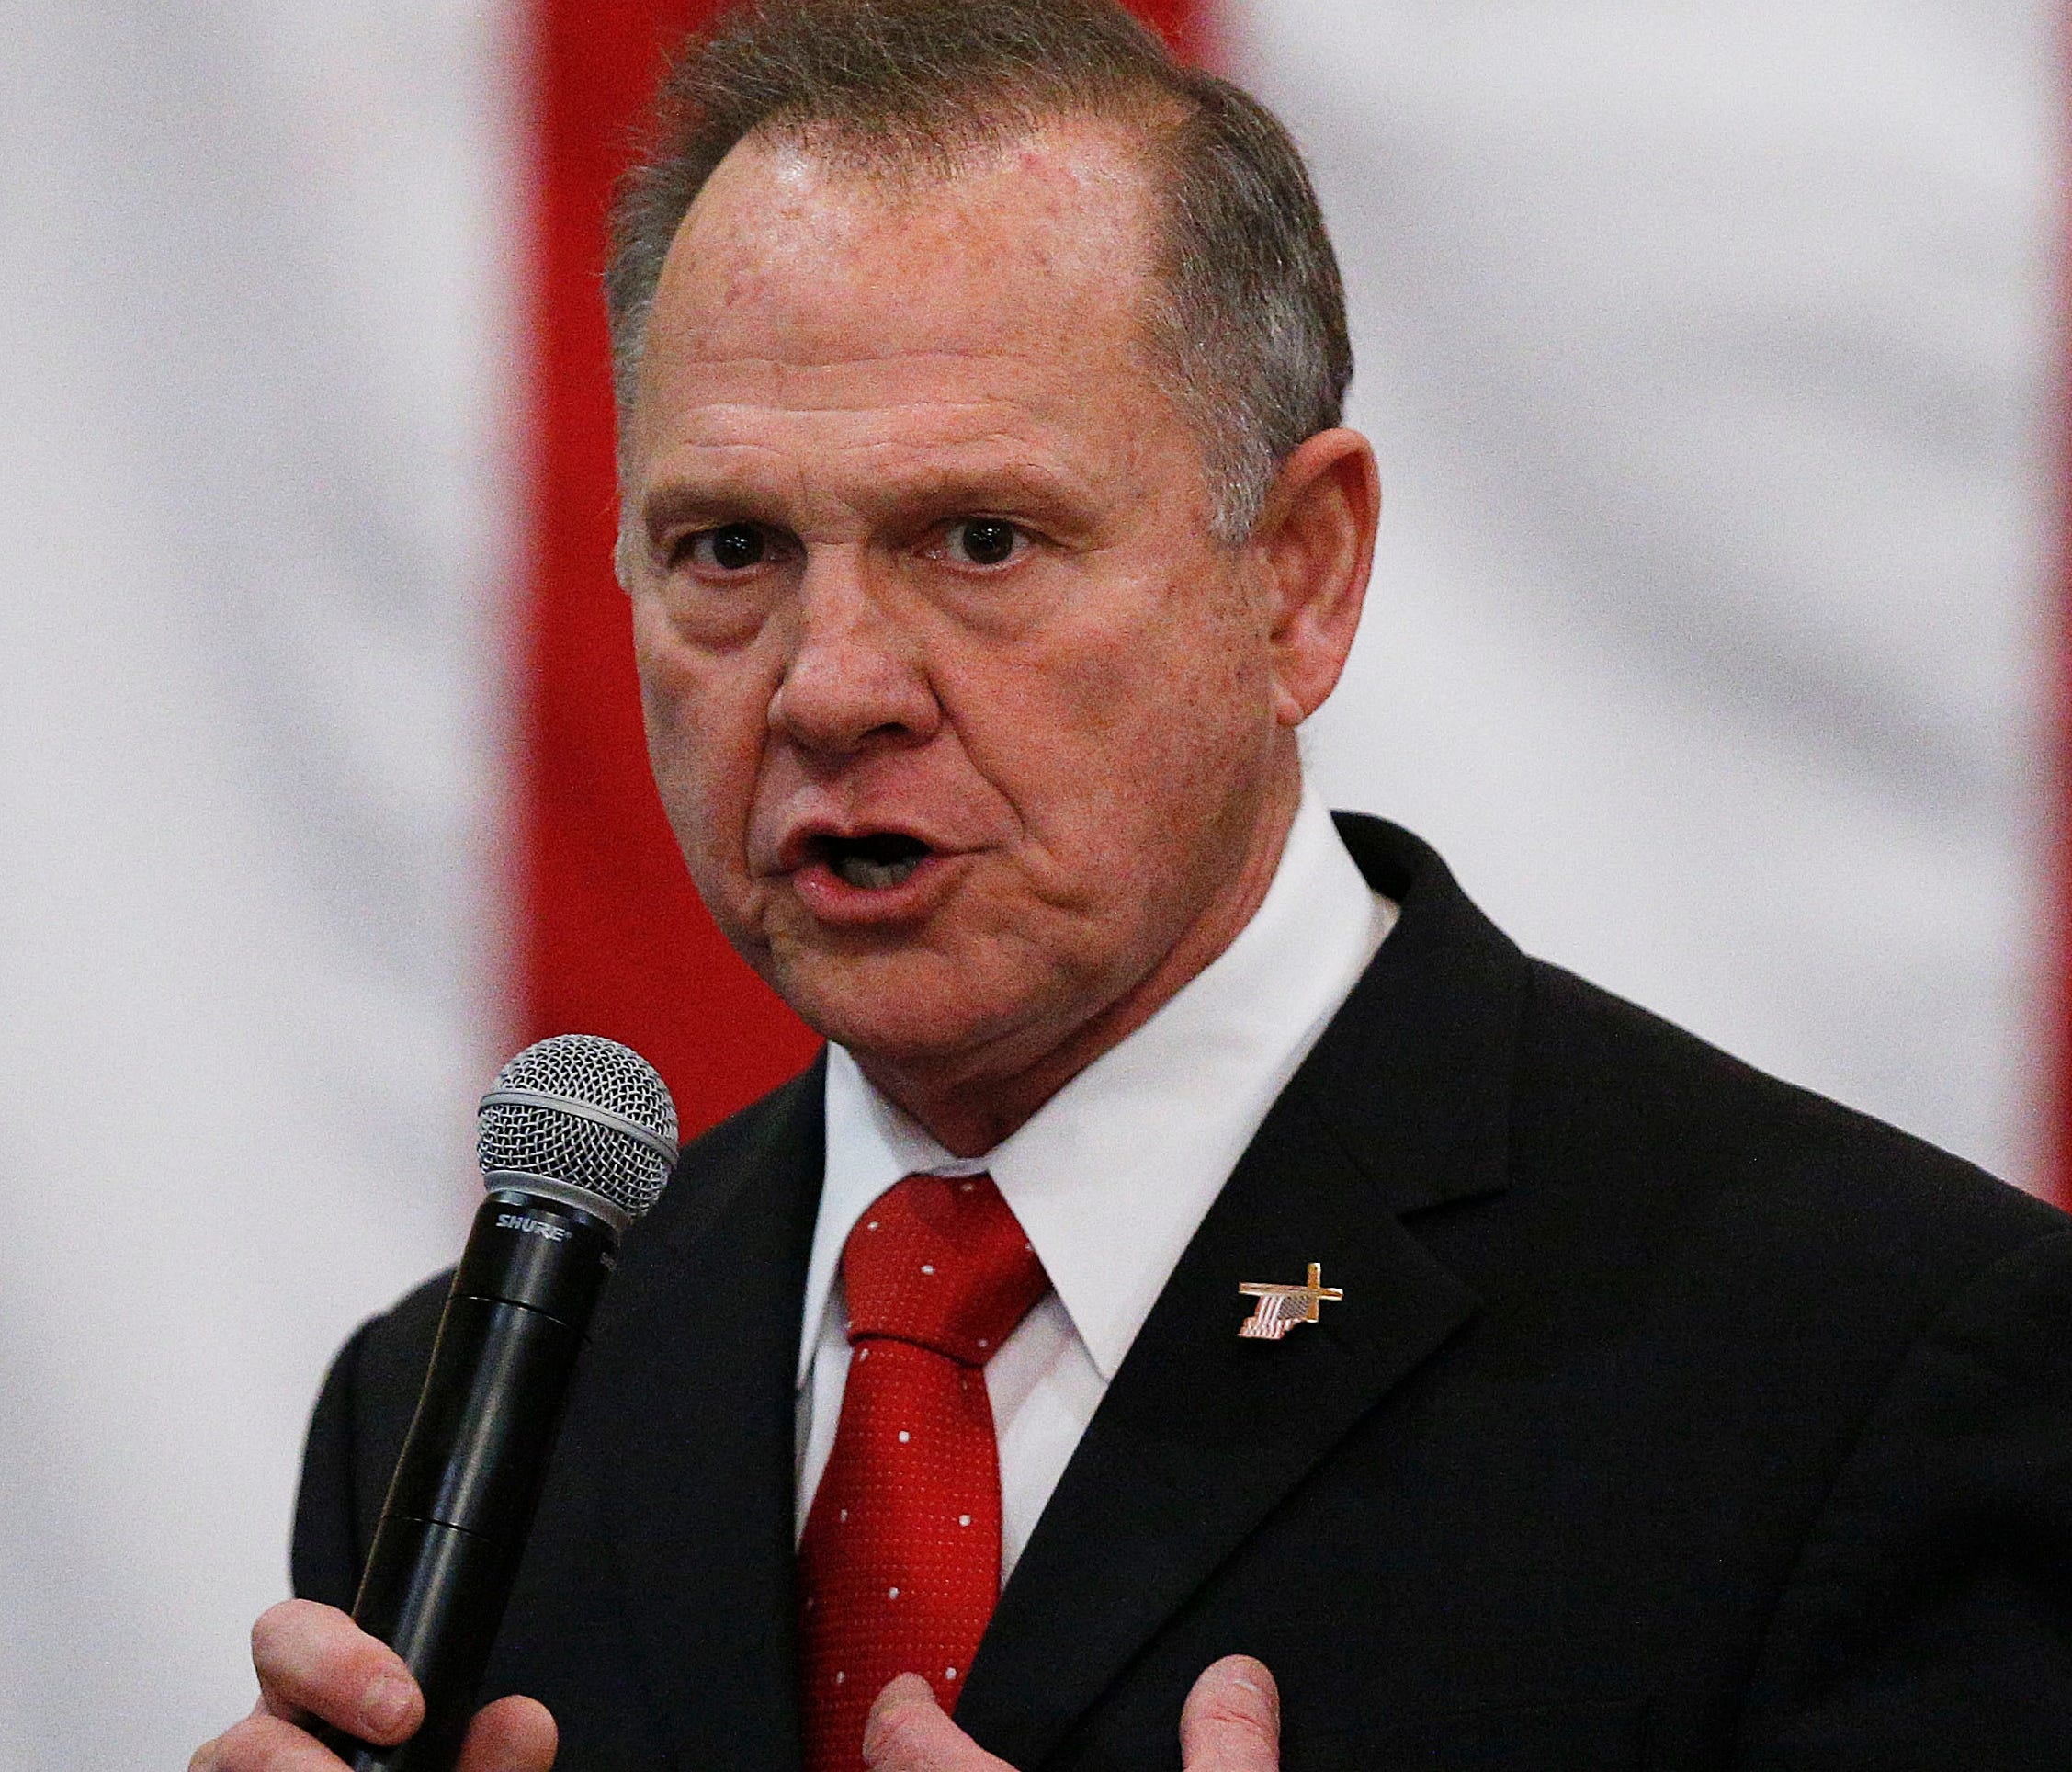 Roy Moore pictured at a campaign rally in Midland City, Ala.